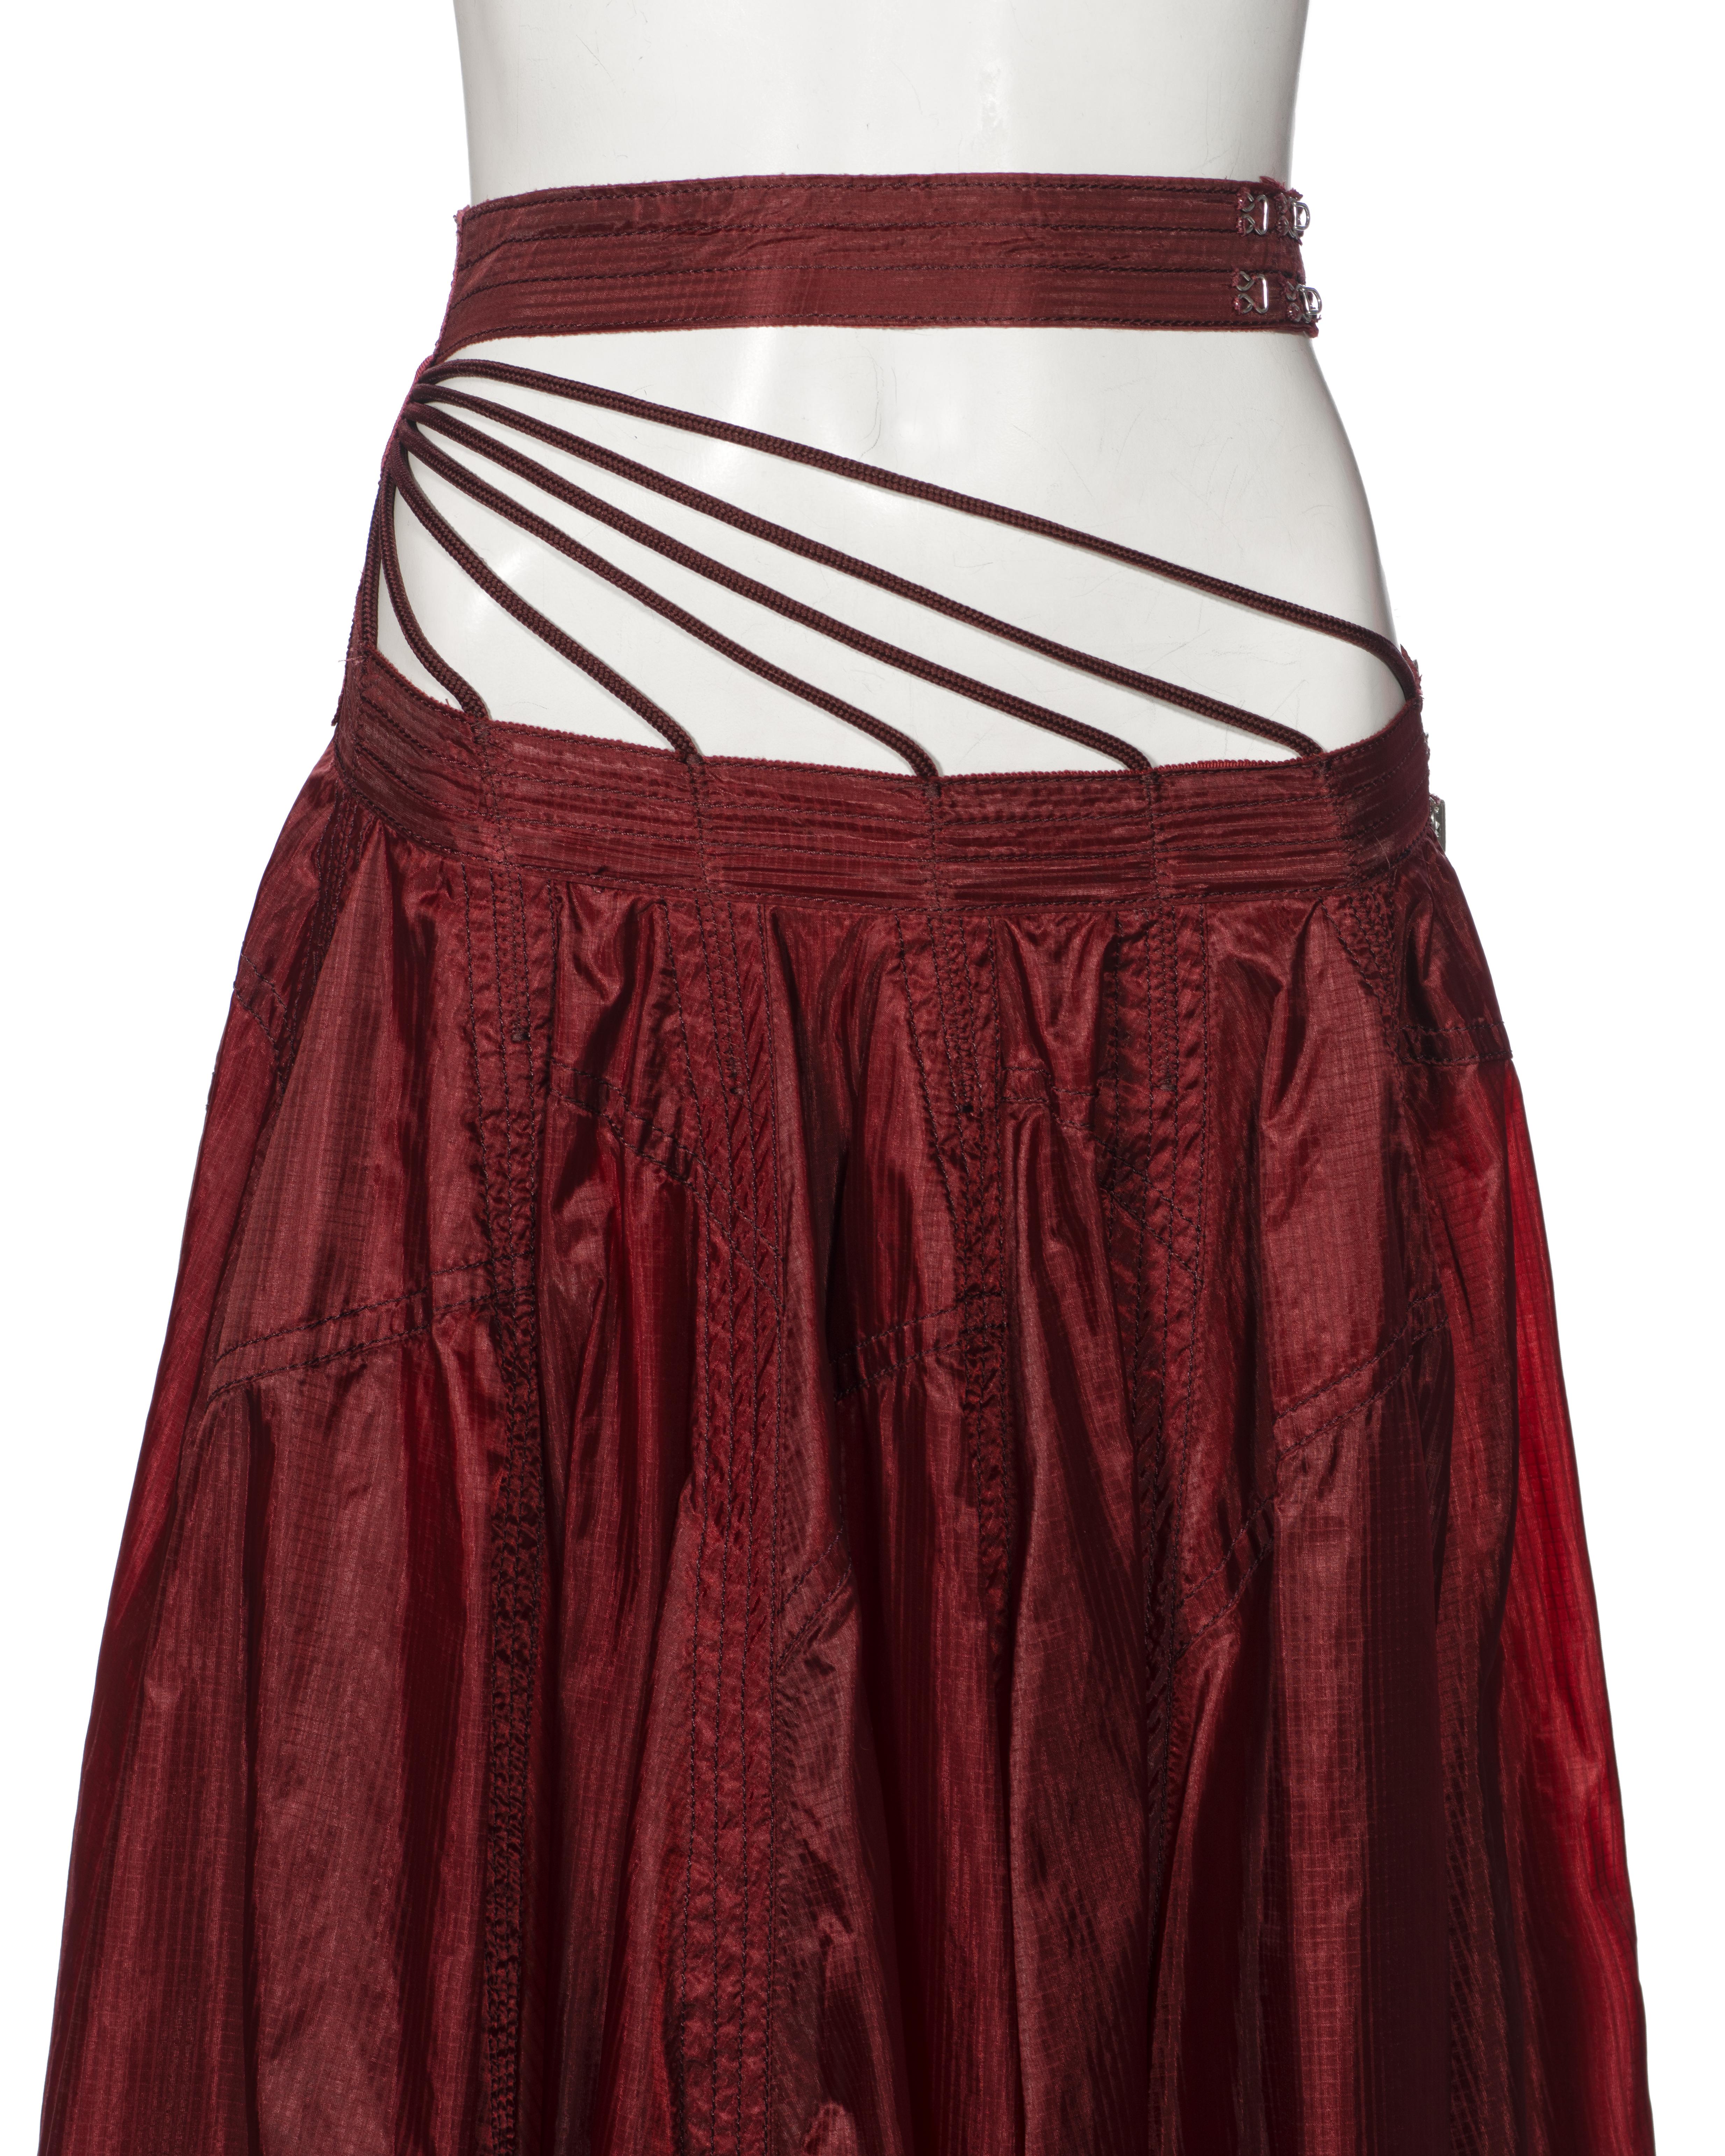 Jean Paul Gaultier Burgundy Ripstop Nylon Strappy-Waist Maxi Skirt, ss 2002 In Excellent Condition For Sale In London, GB